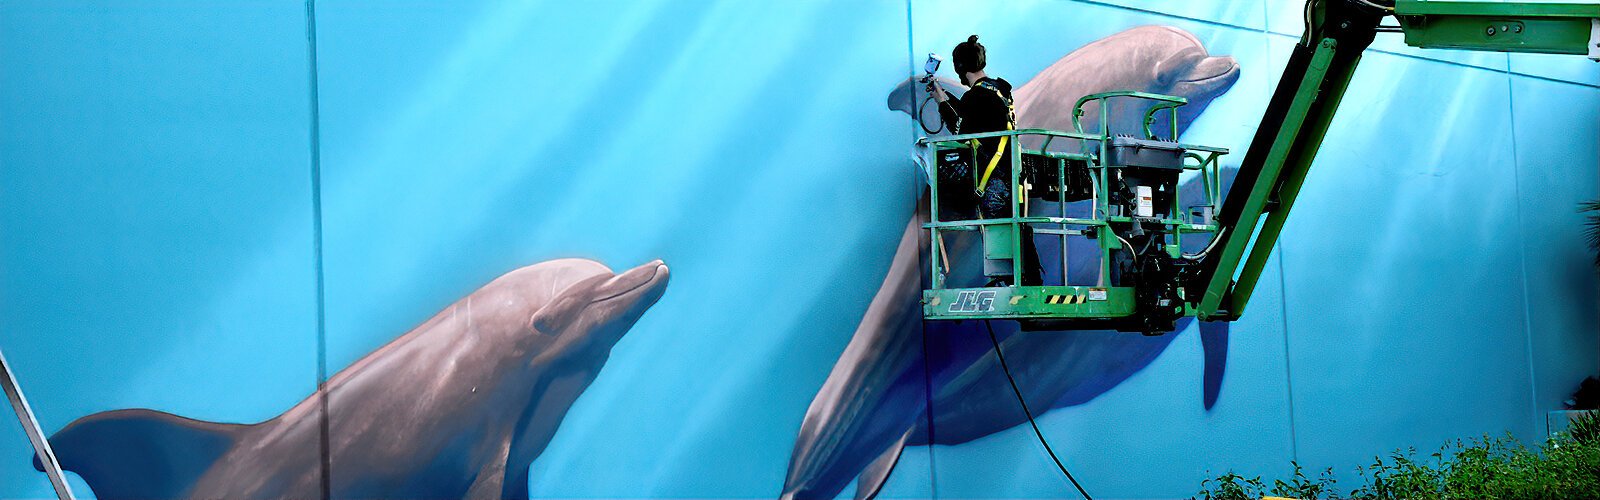 Artist Sonny “Sundancer” Behan, acclaimed for his large-scale wildlife murals, brings dolphins to life at the Art in the Park celebration in Clearwater's Coachman Park.